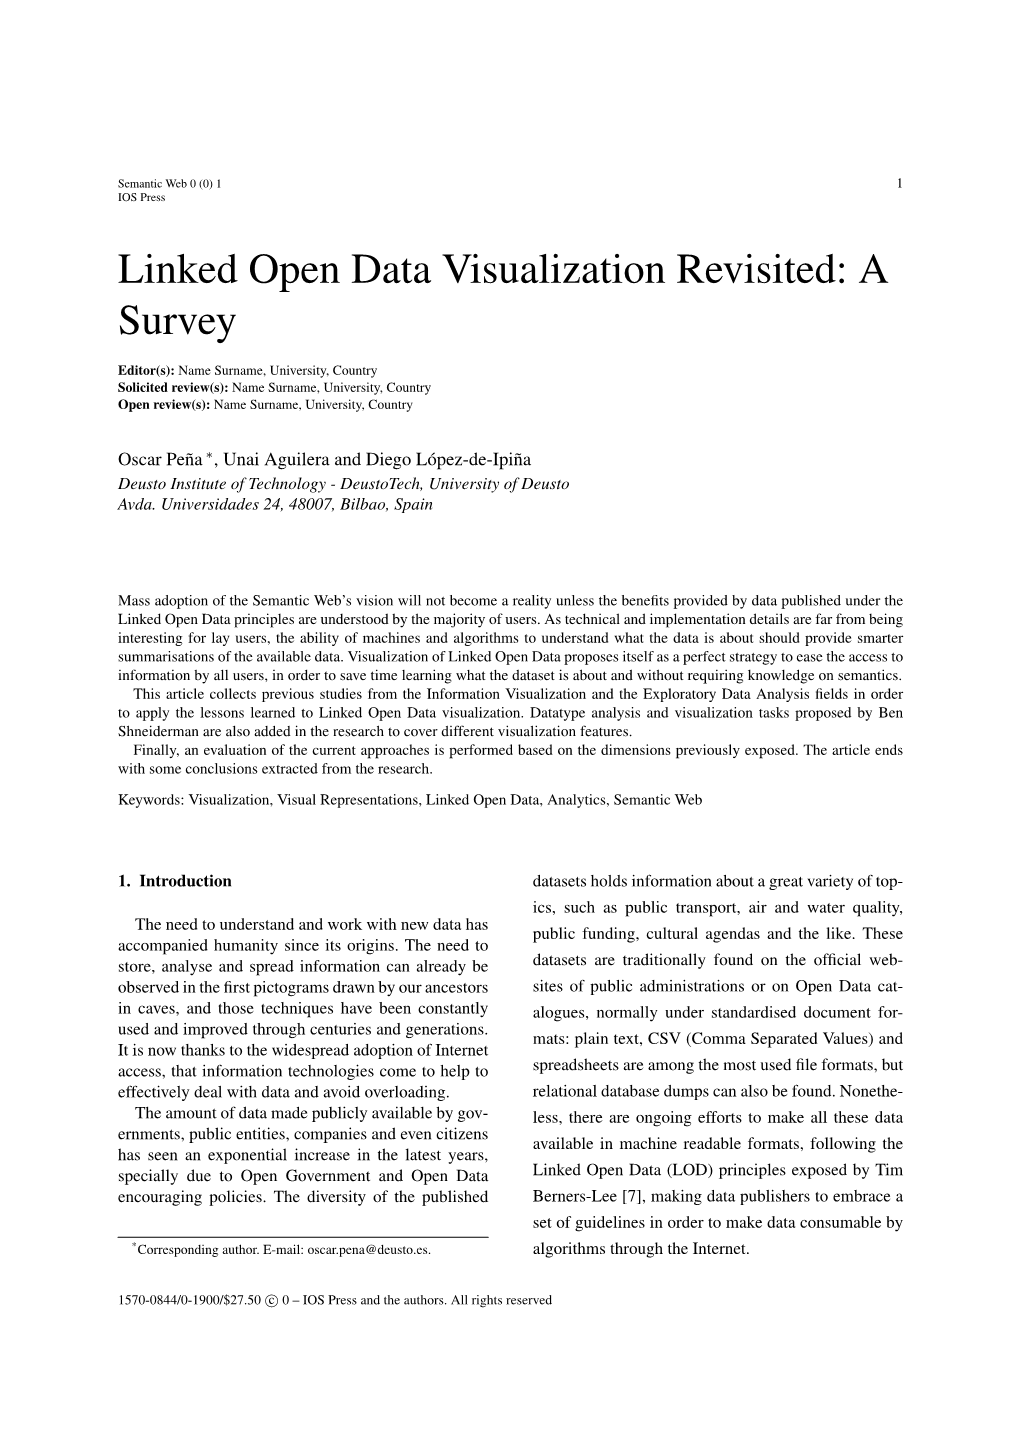 Linked Open Data Visualization Revisited: a Survey